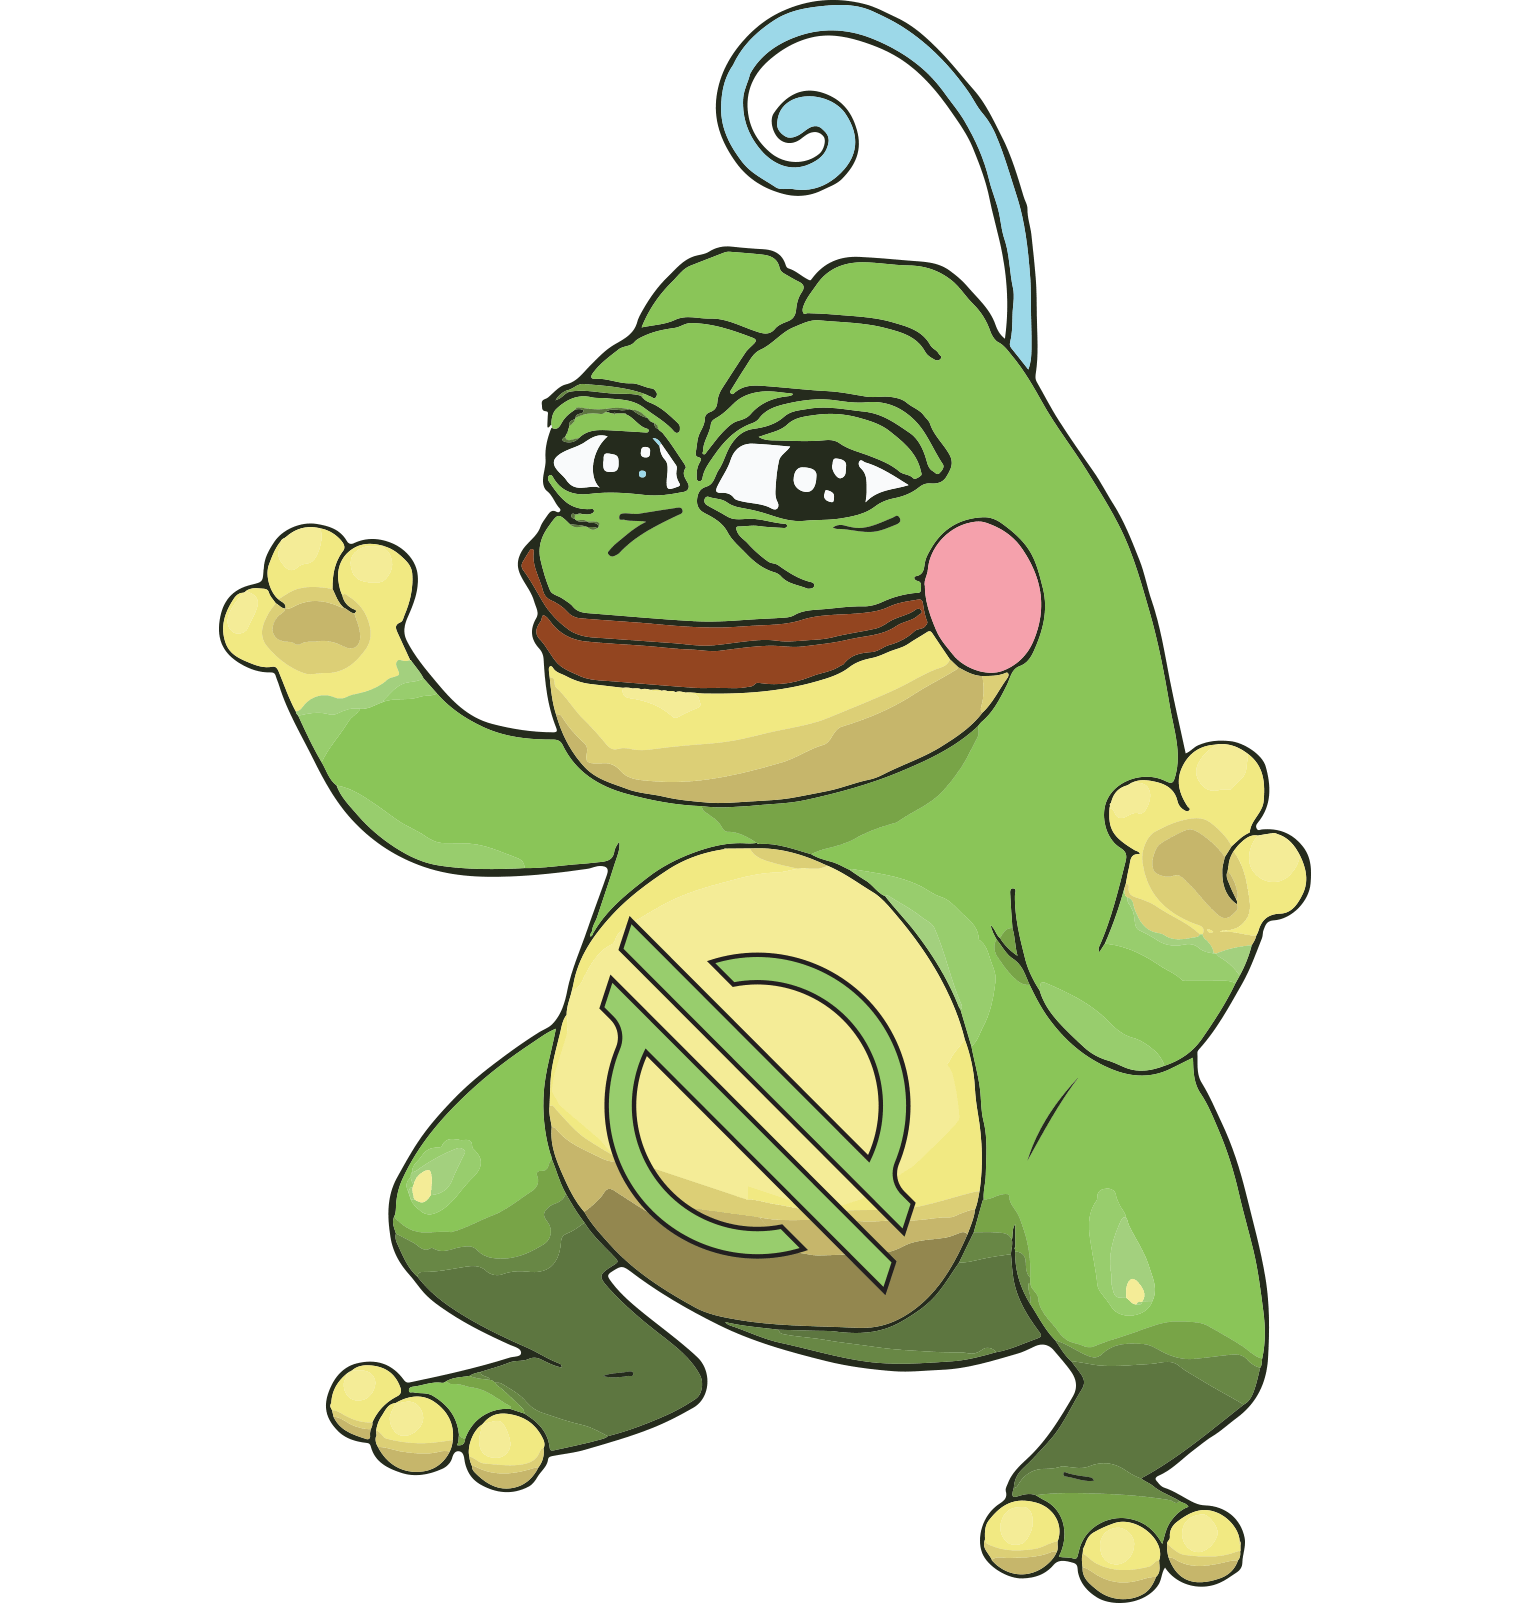 Pepe the Frog meme is a internet meme featuring a cartoon character that has become internet culture